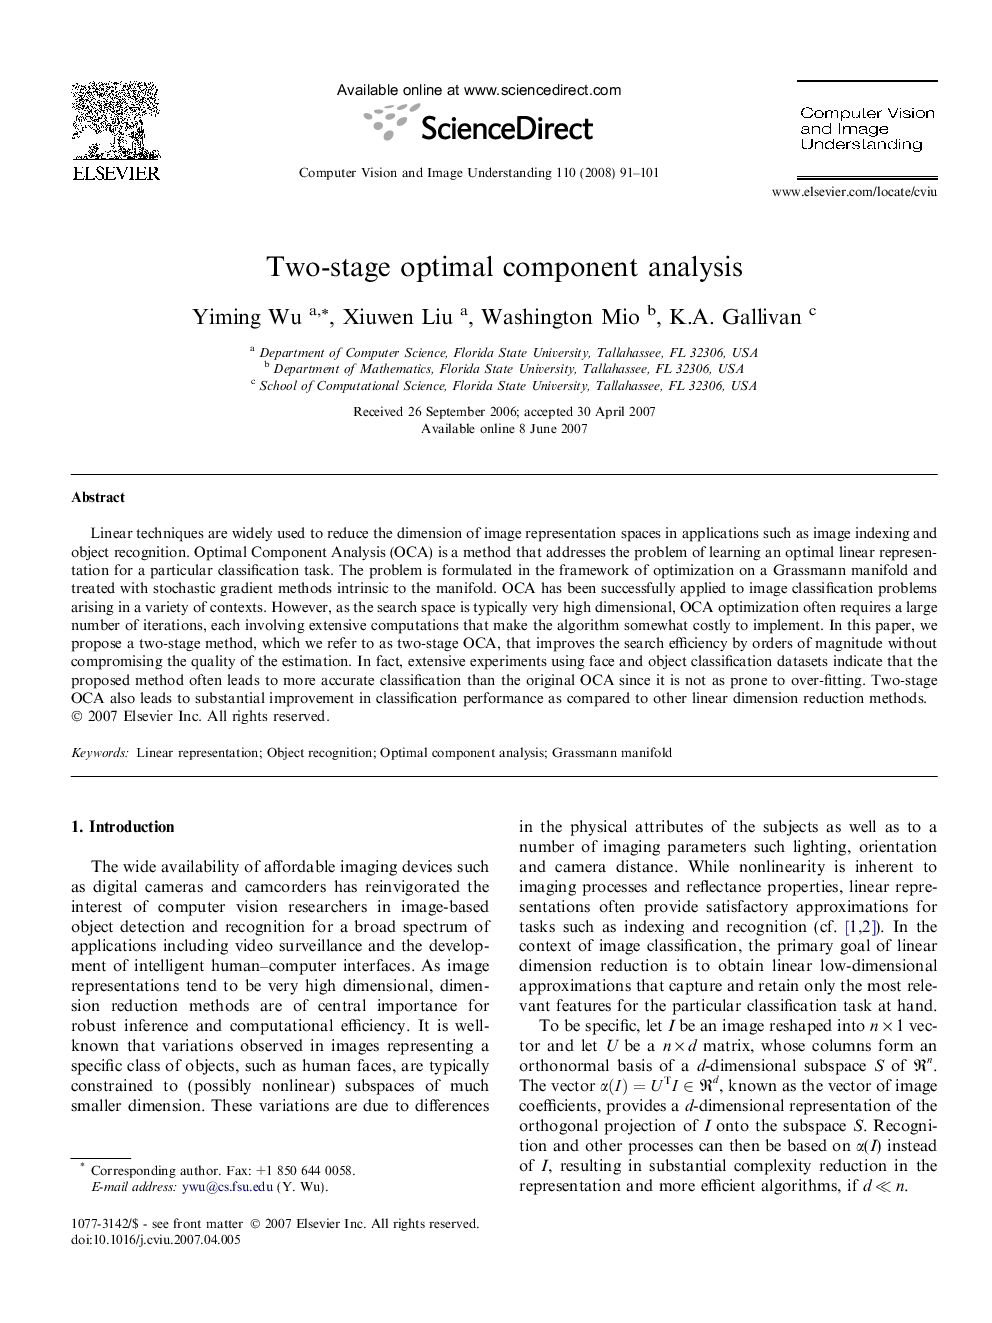 Two-stage optimal component analysis